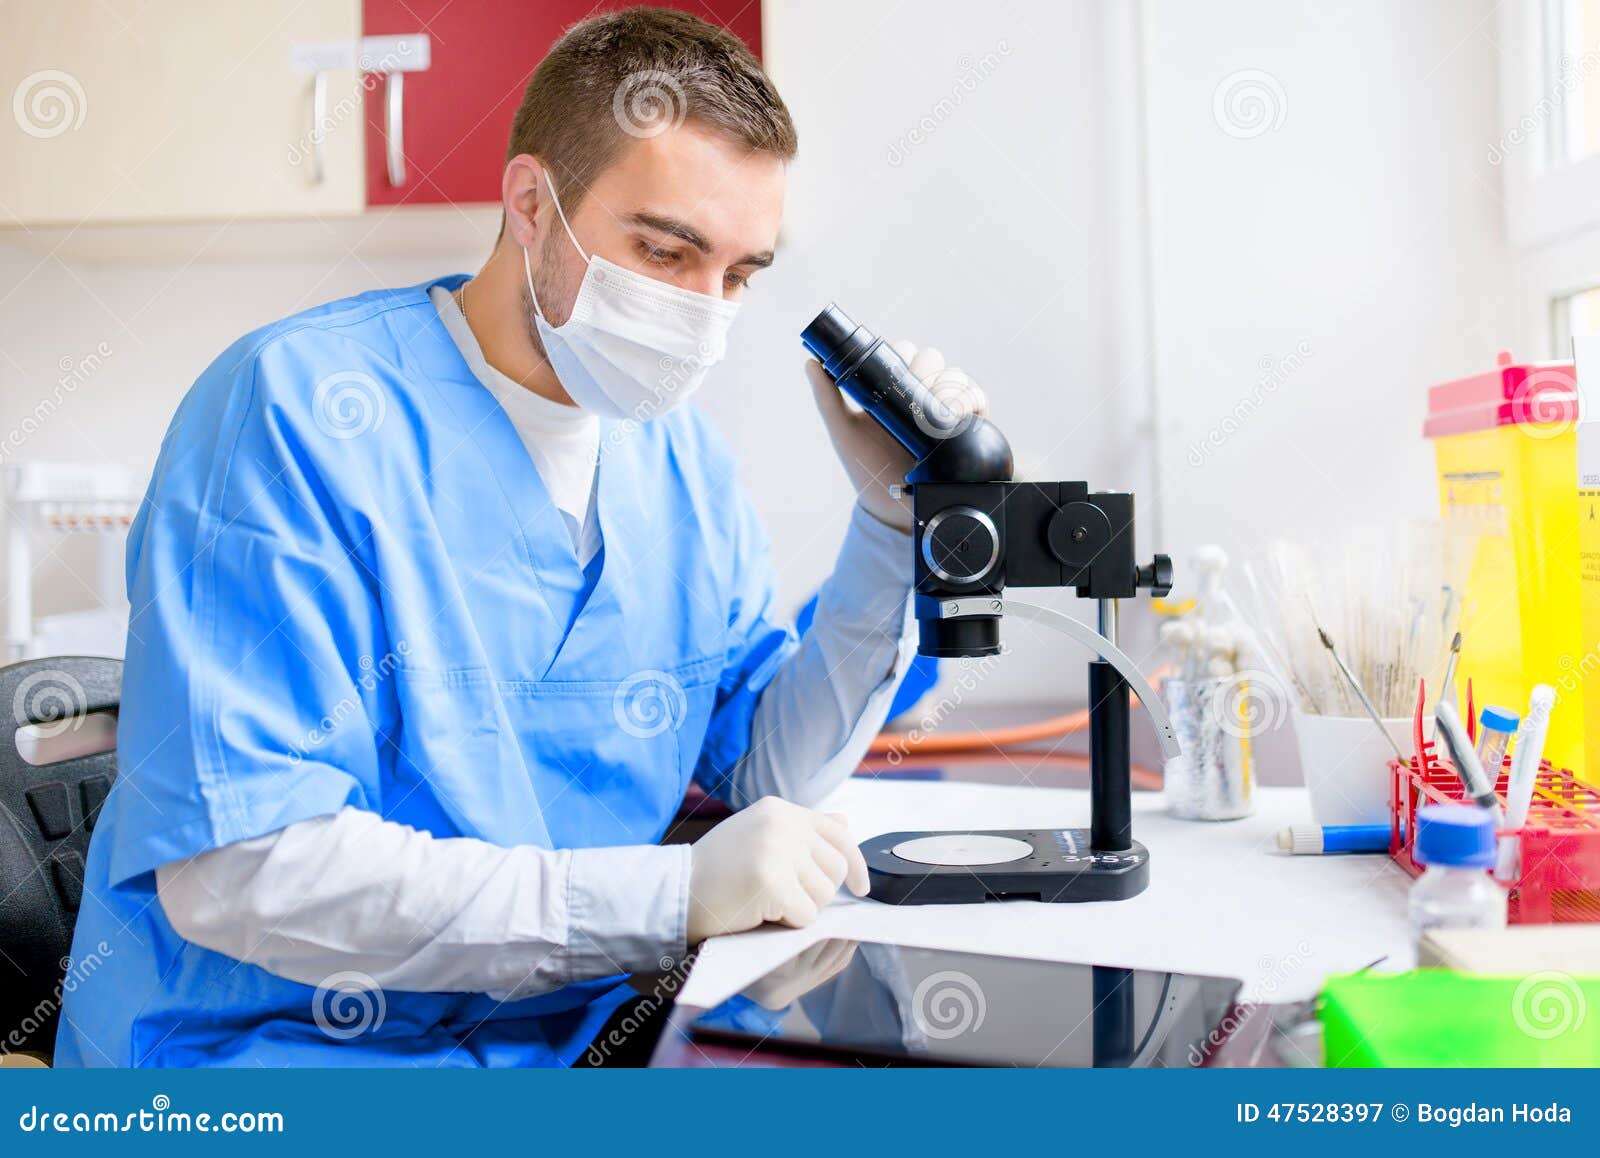 Male researcher carrying out scientific research in a laboratory using tablet and microscope